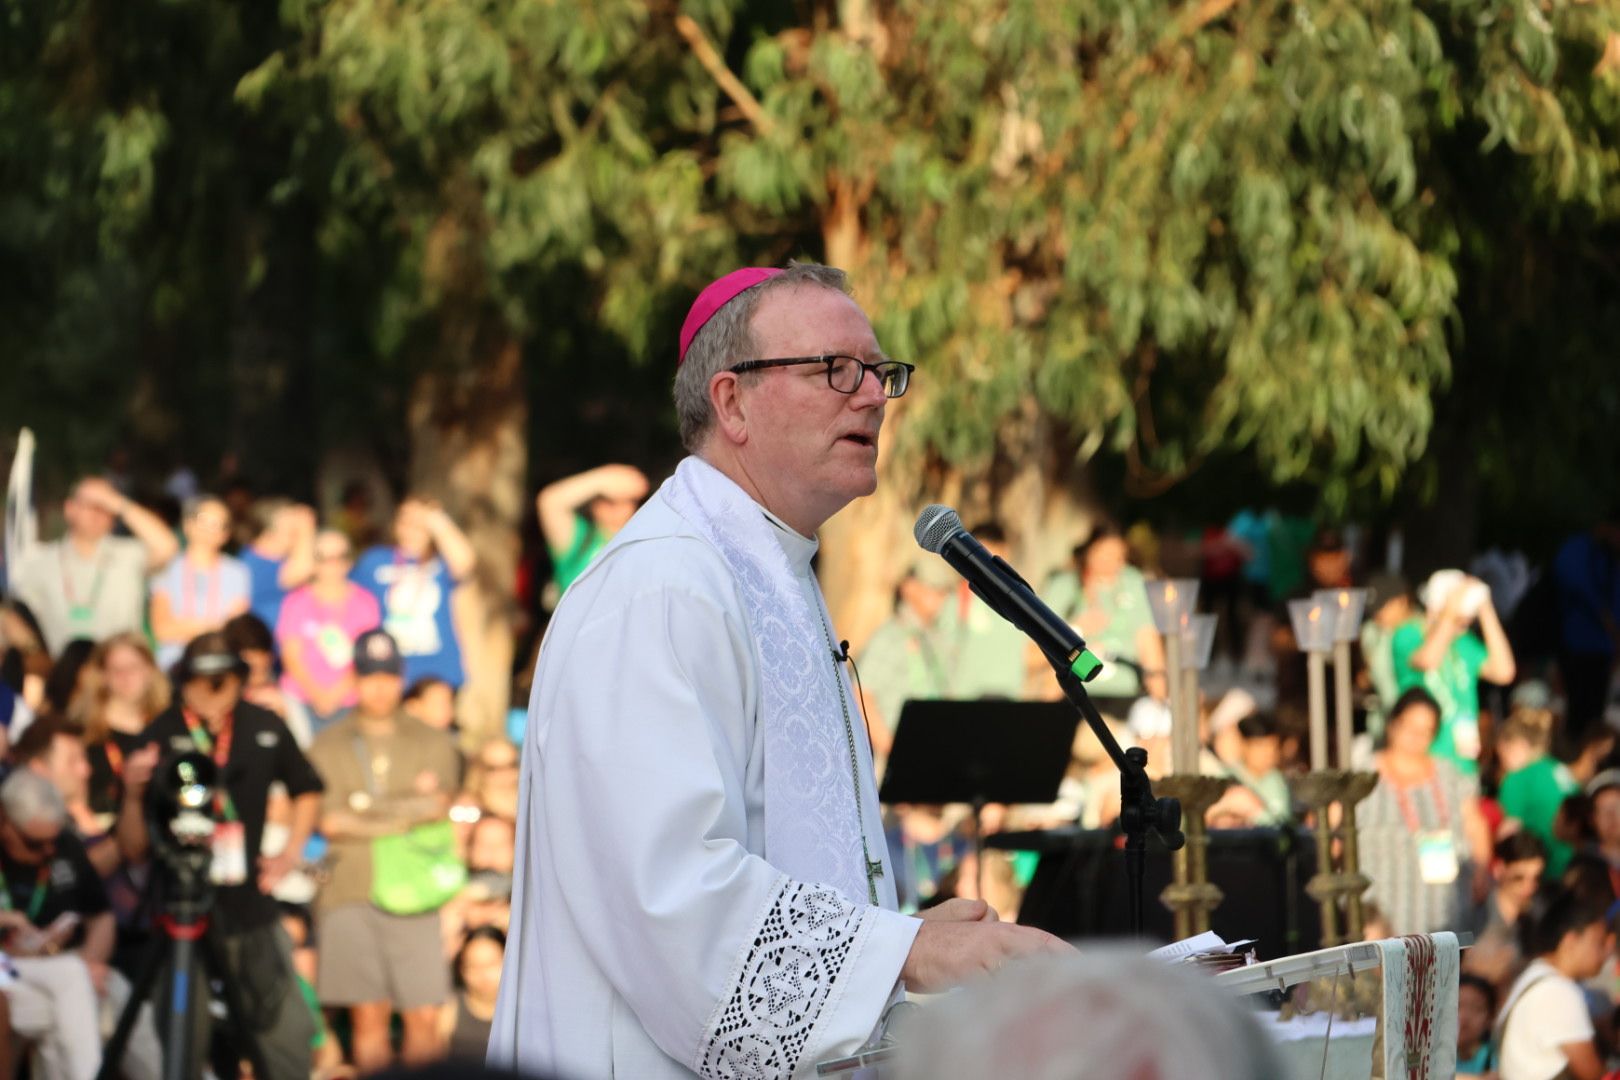 Bishop Barron: As I leave for the Synod on Synodality